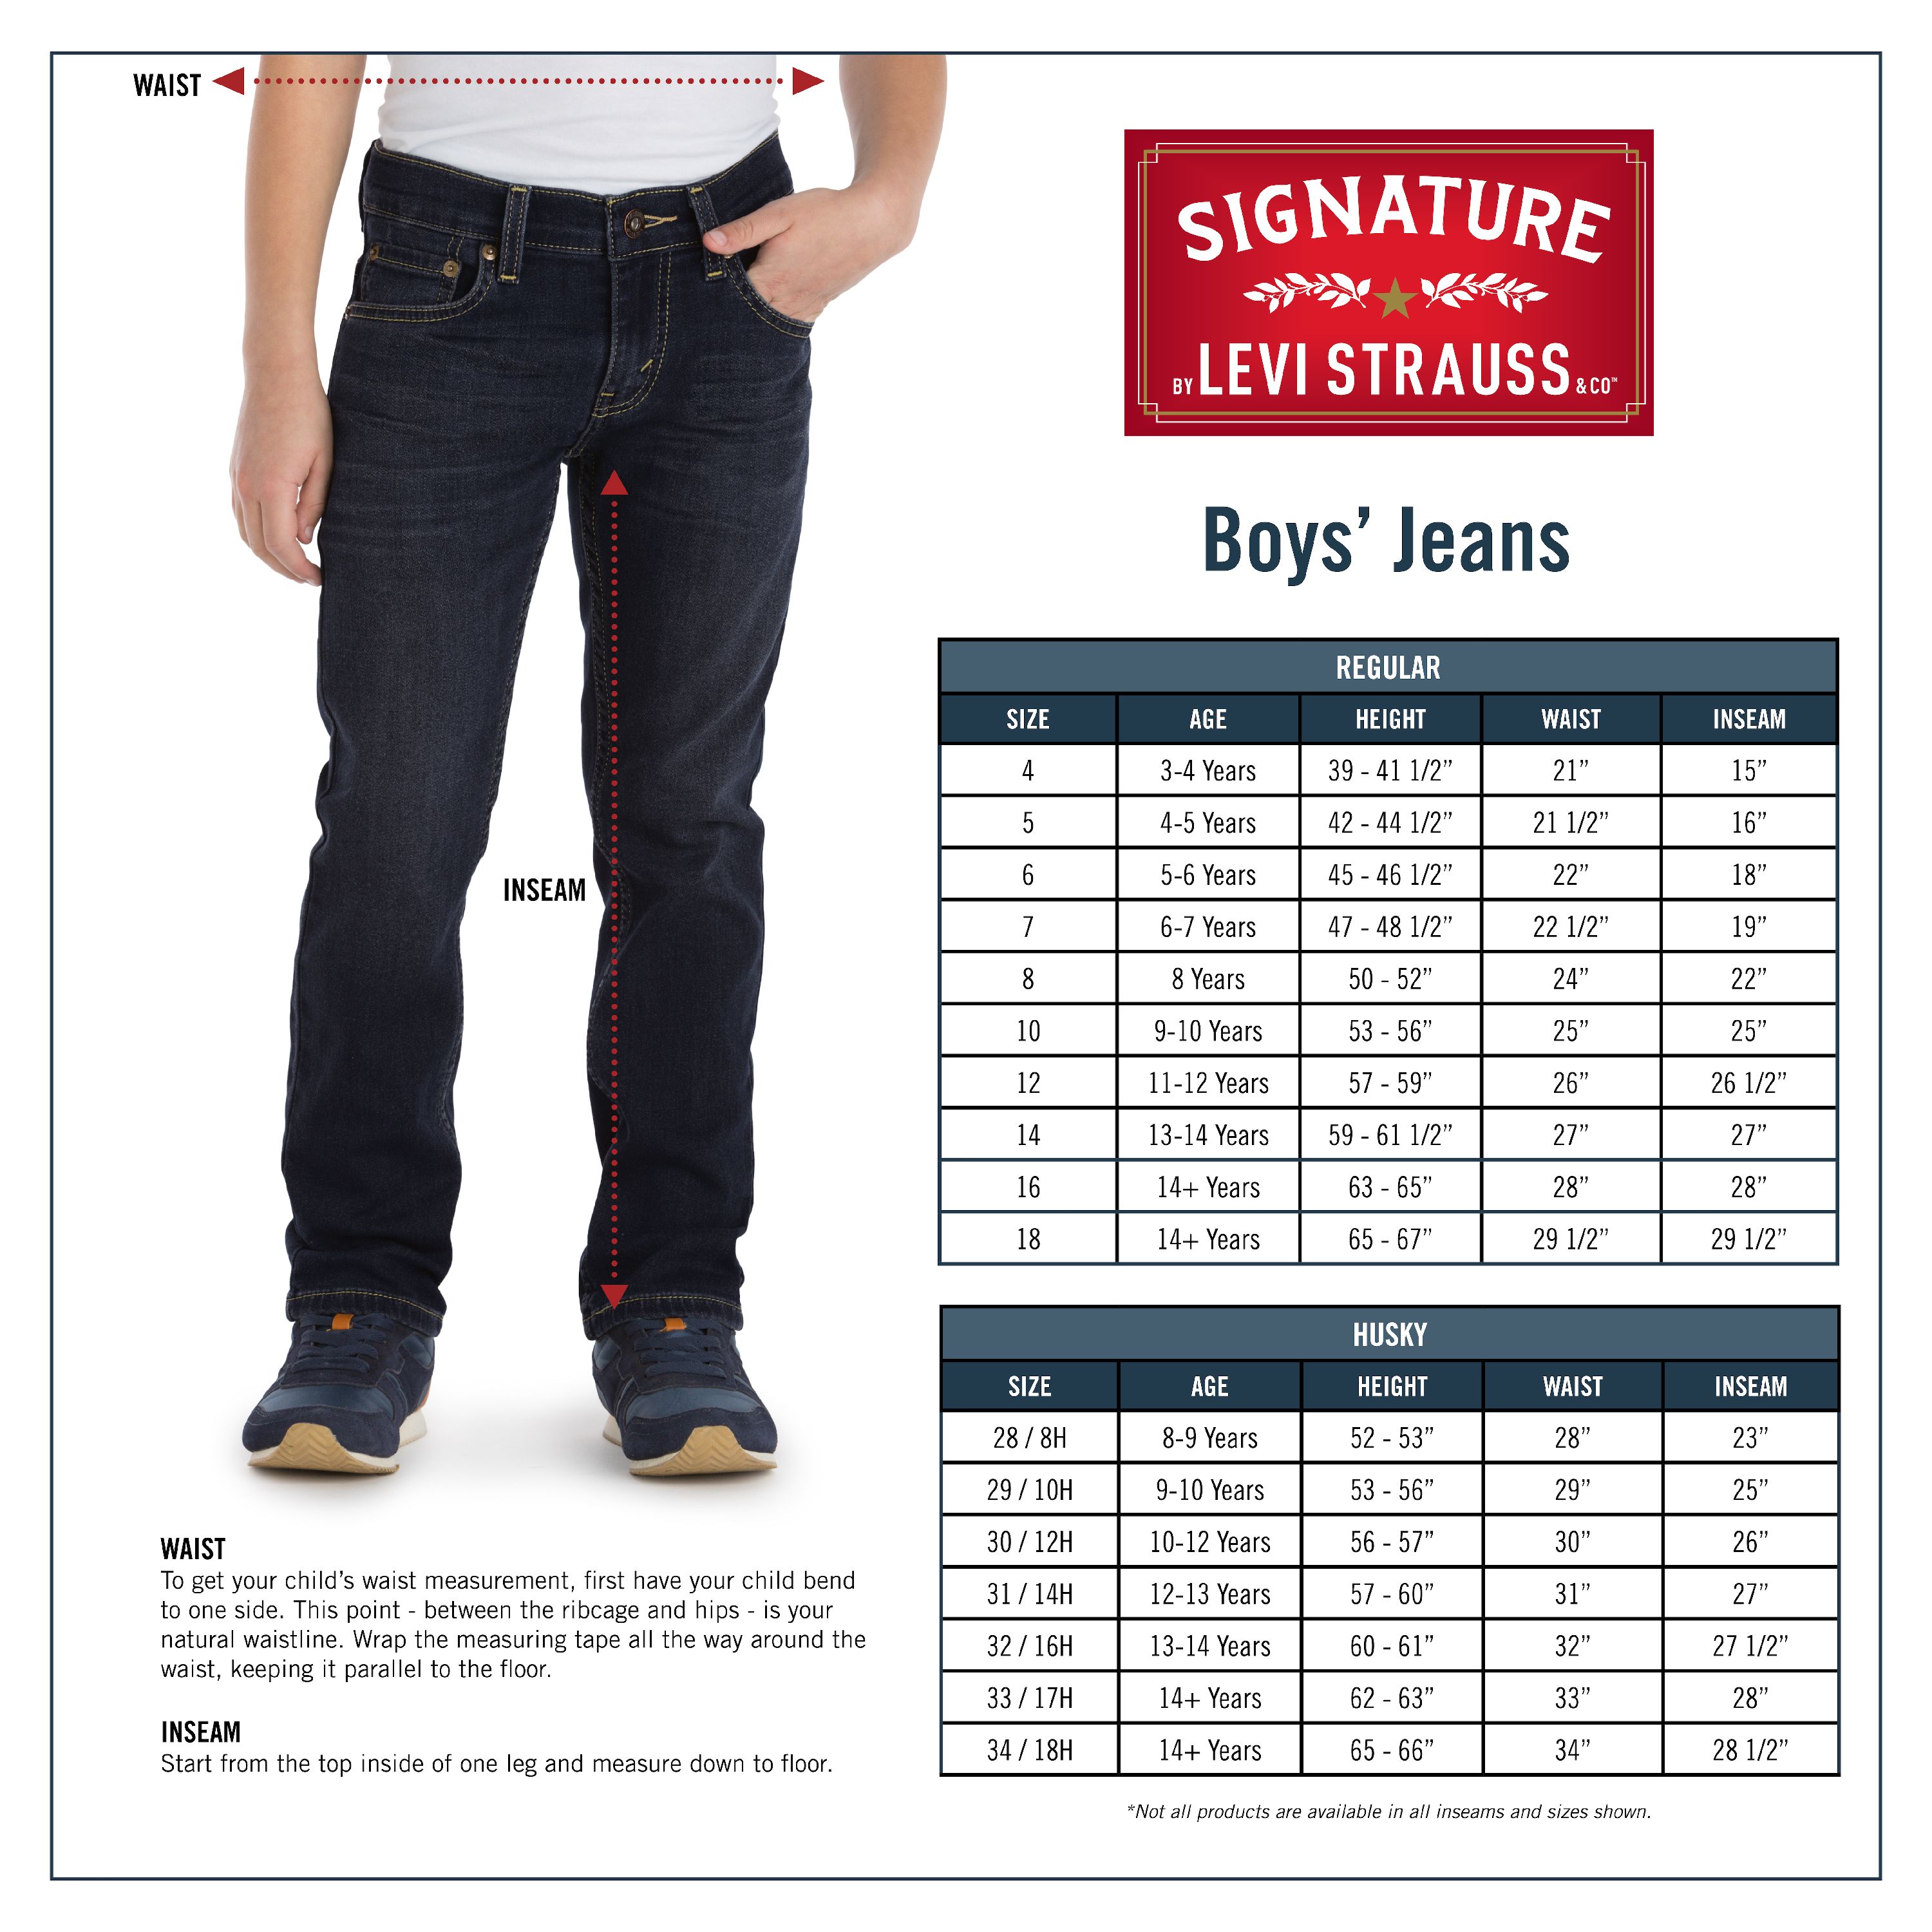 Signature by Levi Strauss & Co. Boys Skinny Fit Jeans Sizes 4-18 - image 5 of 5